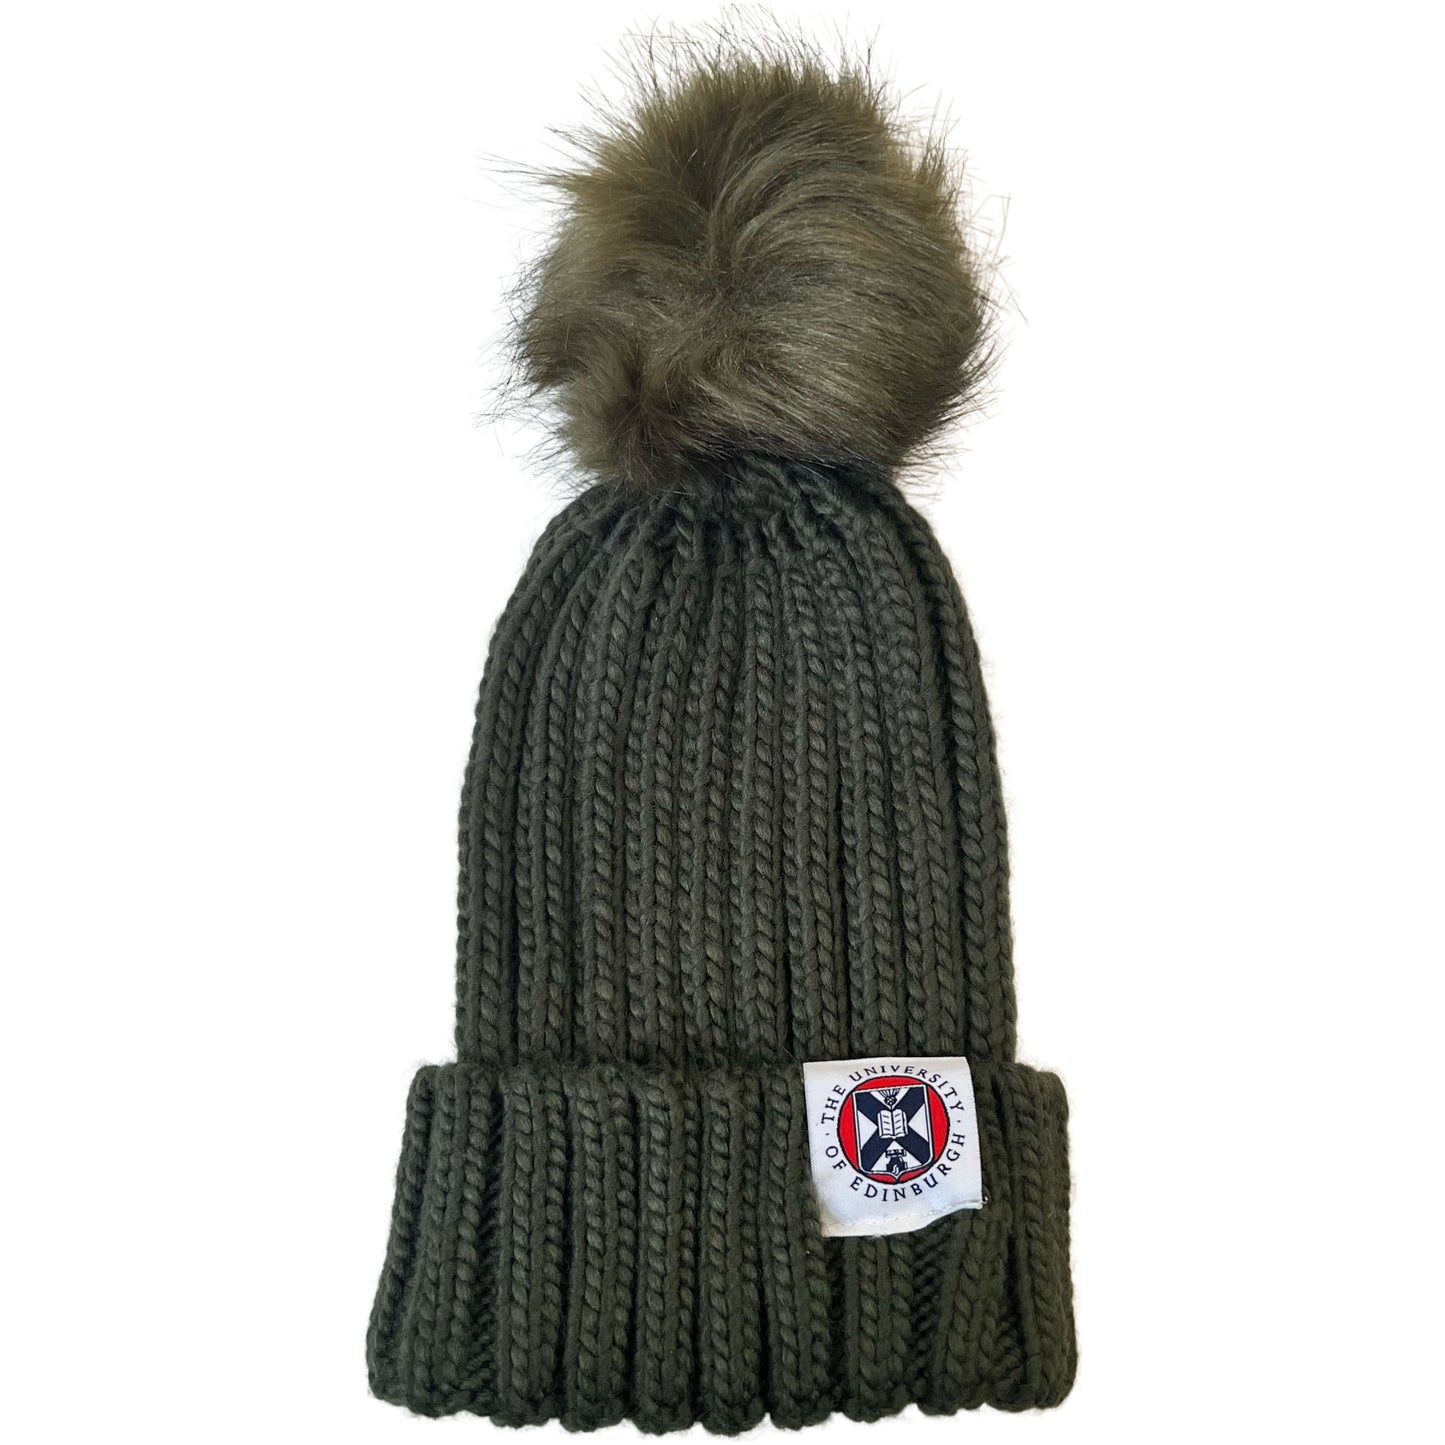 Olive Green knit beanie with faux fur pom pom and woven label featuring university crest